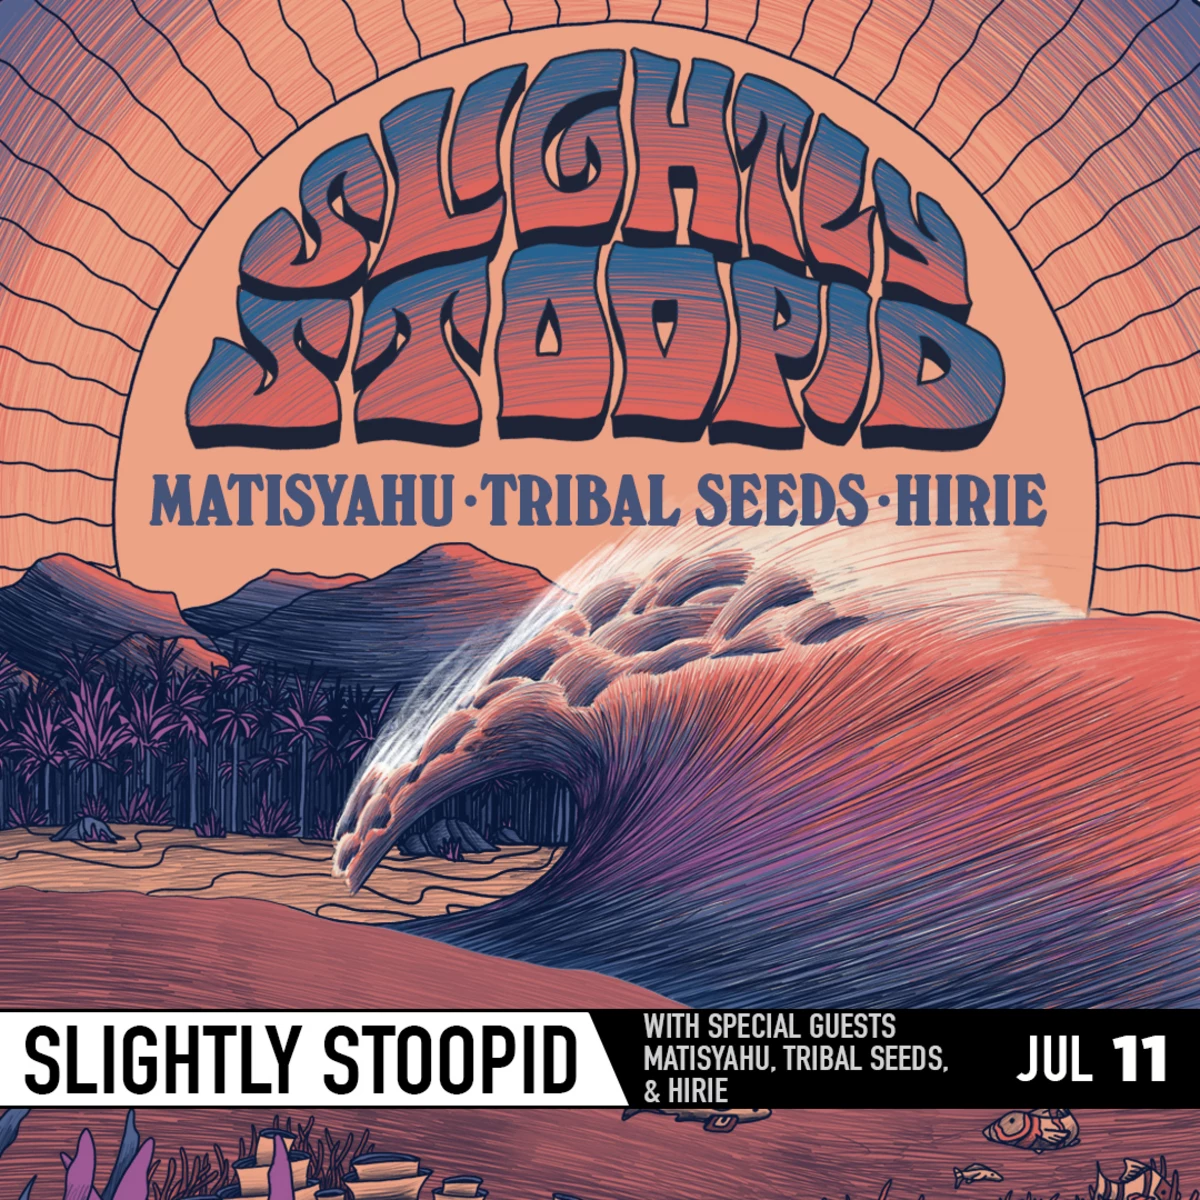 Slightly Stoopid Announces Summer Tour Stop in Montana